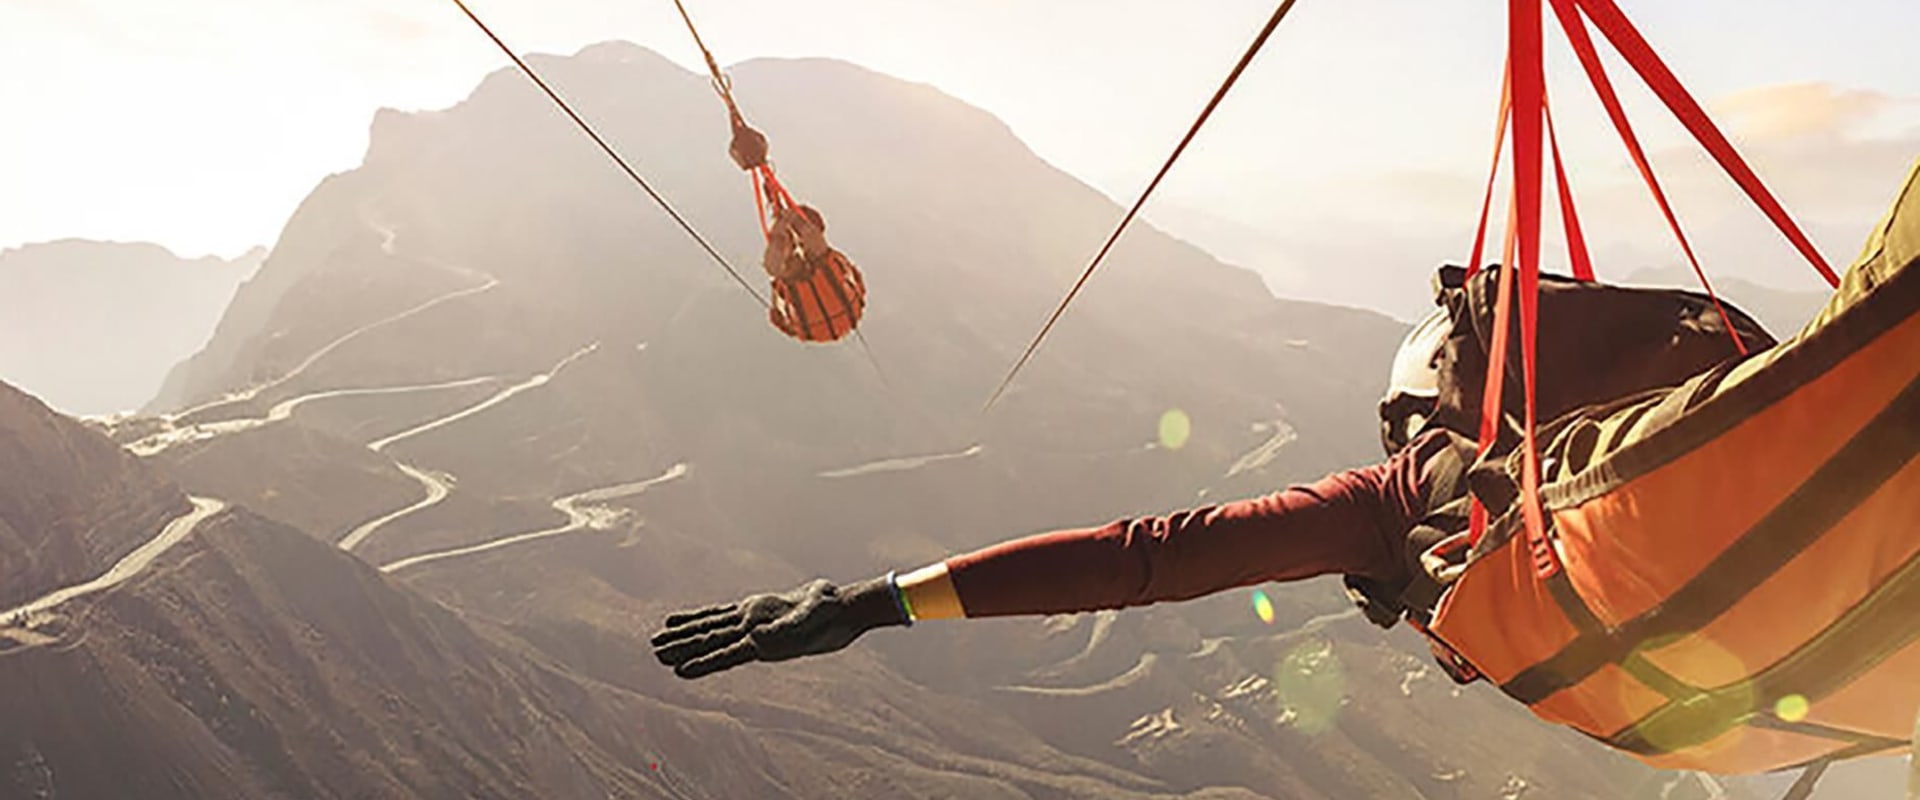 What are the longest ziplines in the world?